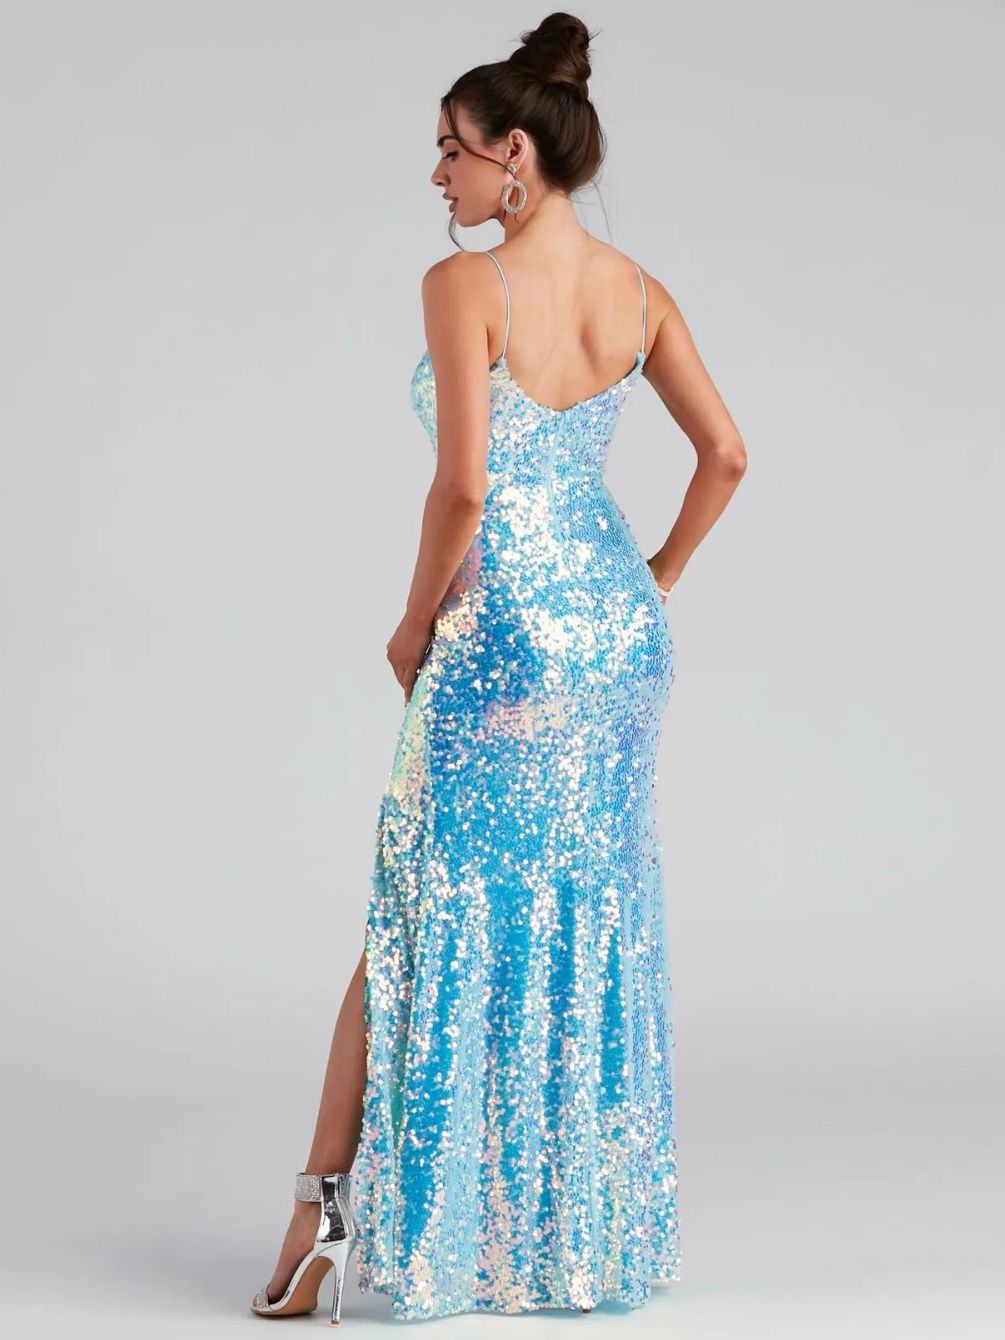 Spaghetti Straps Backless High Slit Slim Fit Sequin Gown